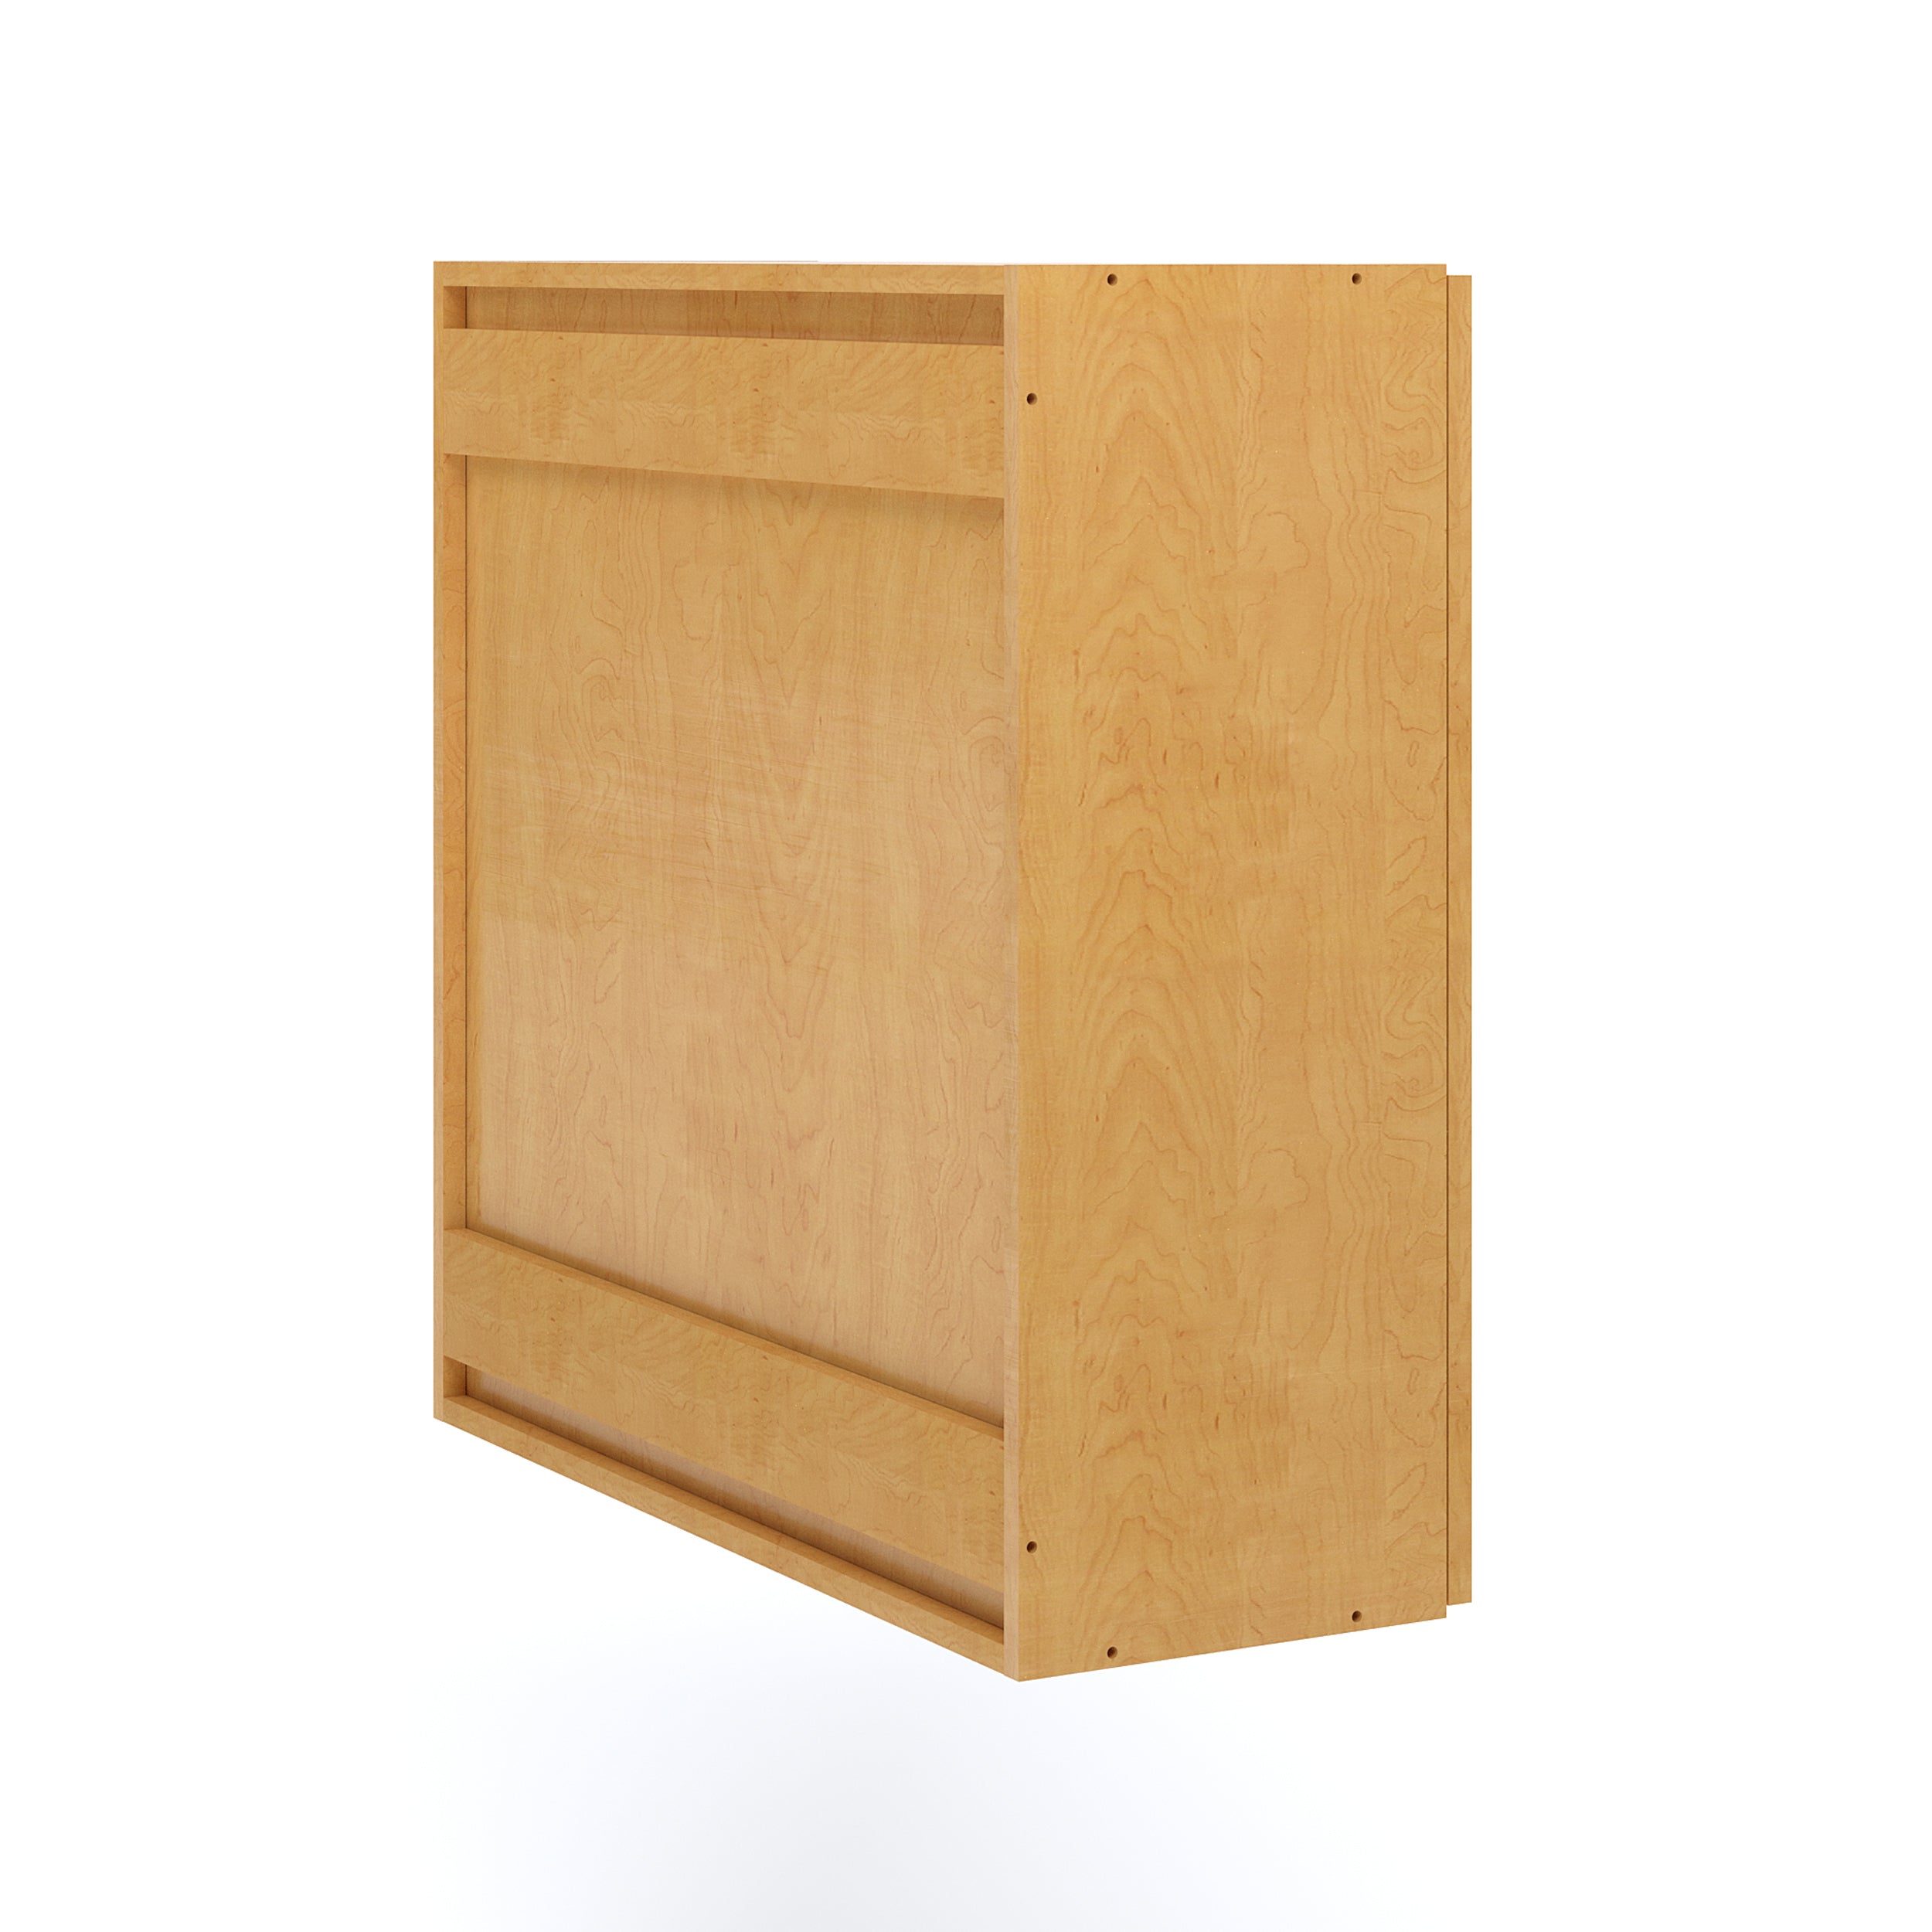 4-Compartment Wall Cabinet 37" Wide